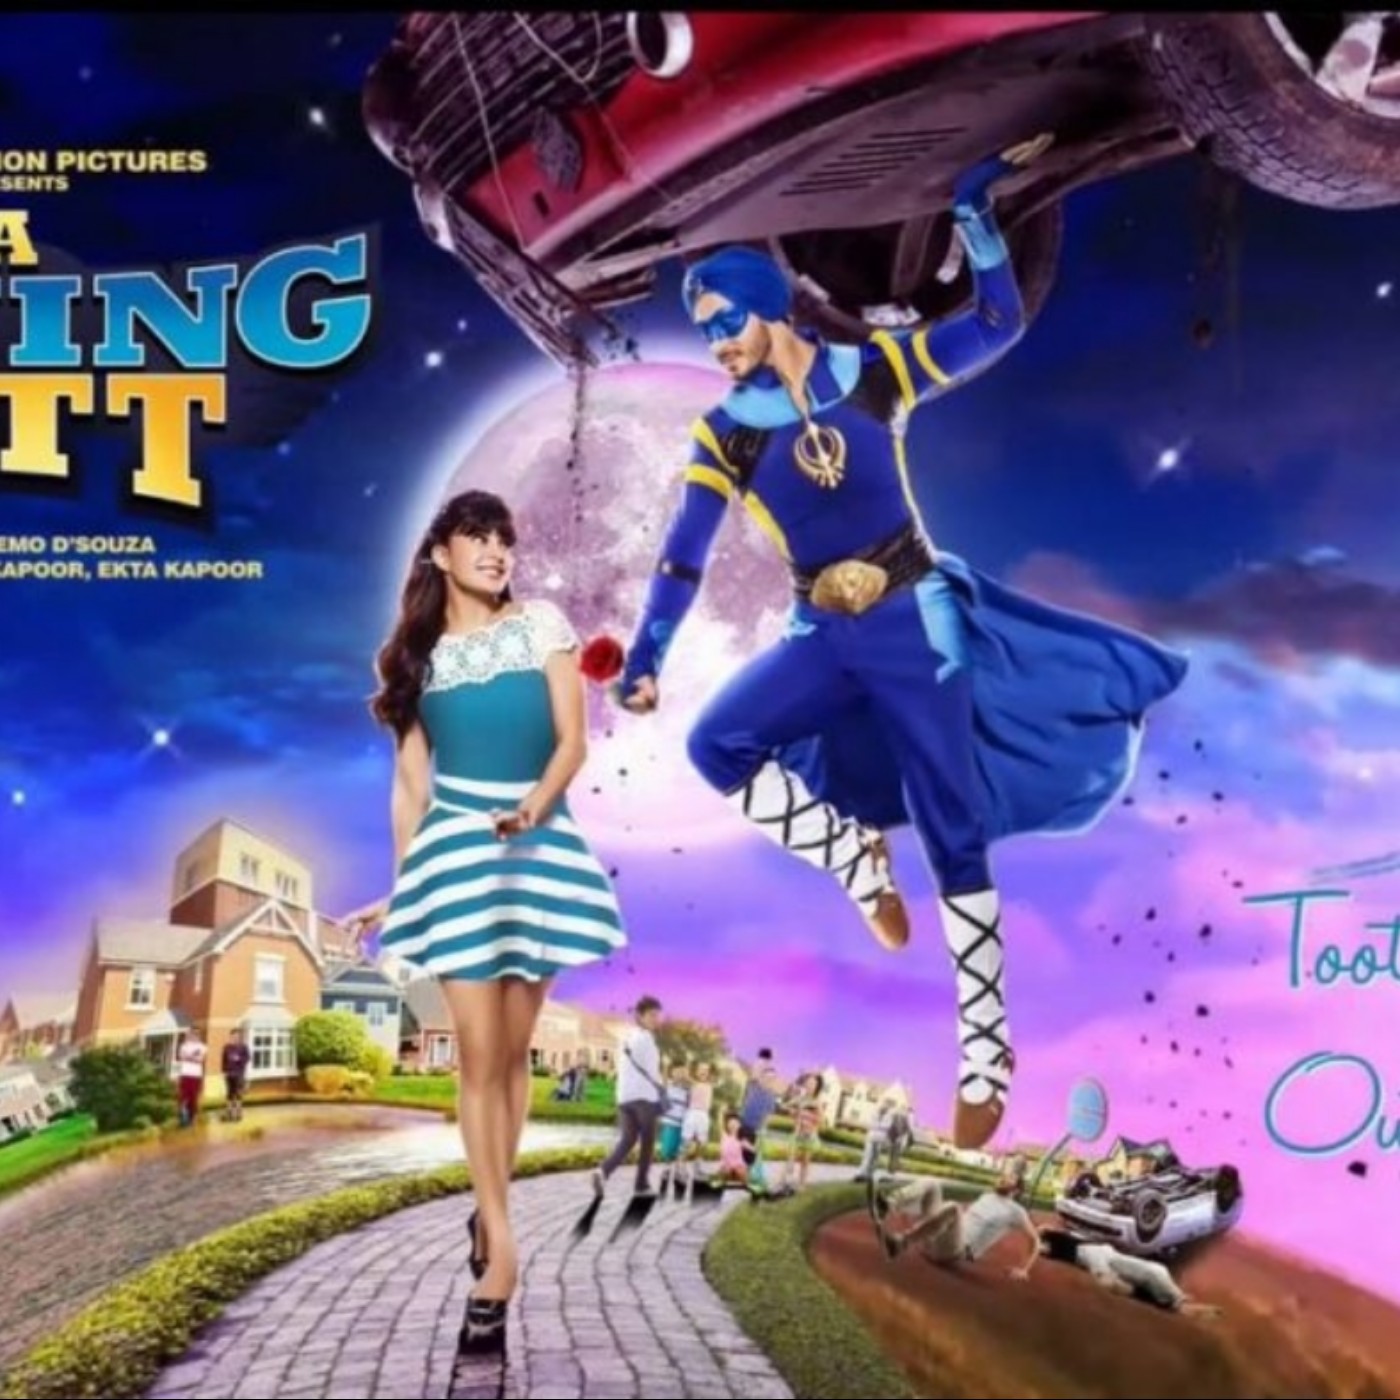 A Flying Jatt Movie In Hindi Torrent Download WORK | Podcast on SoundOn